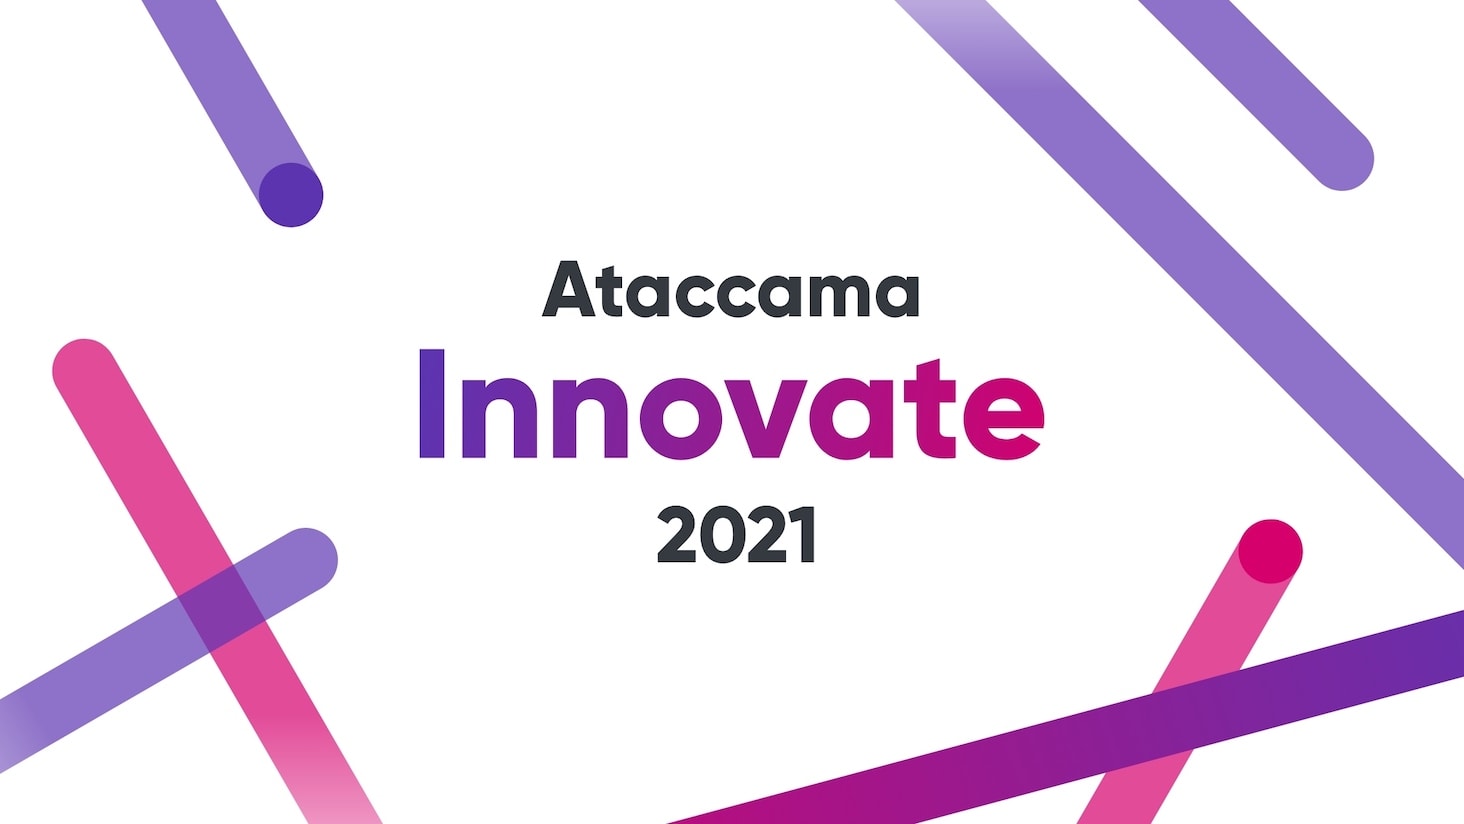 Ataccama Innovate 2021 Conference on Demand